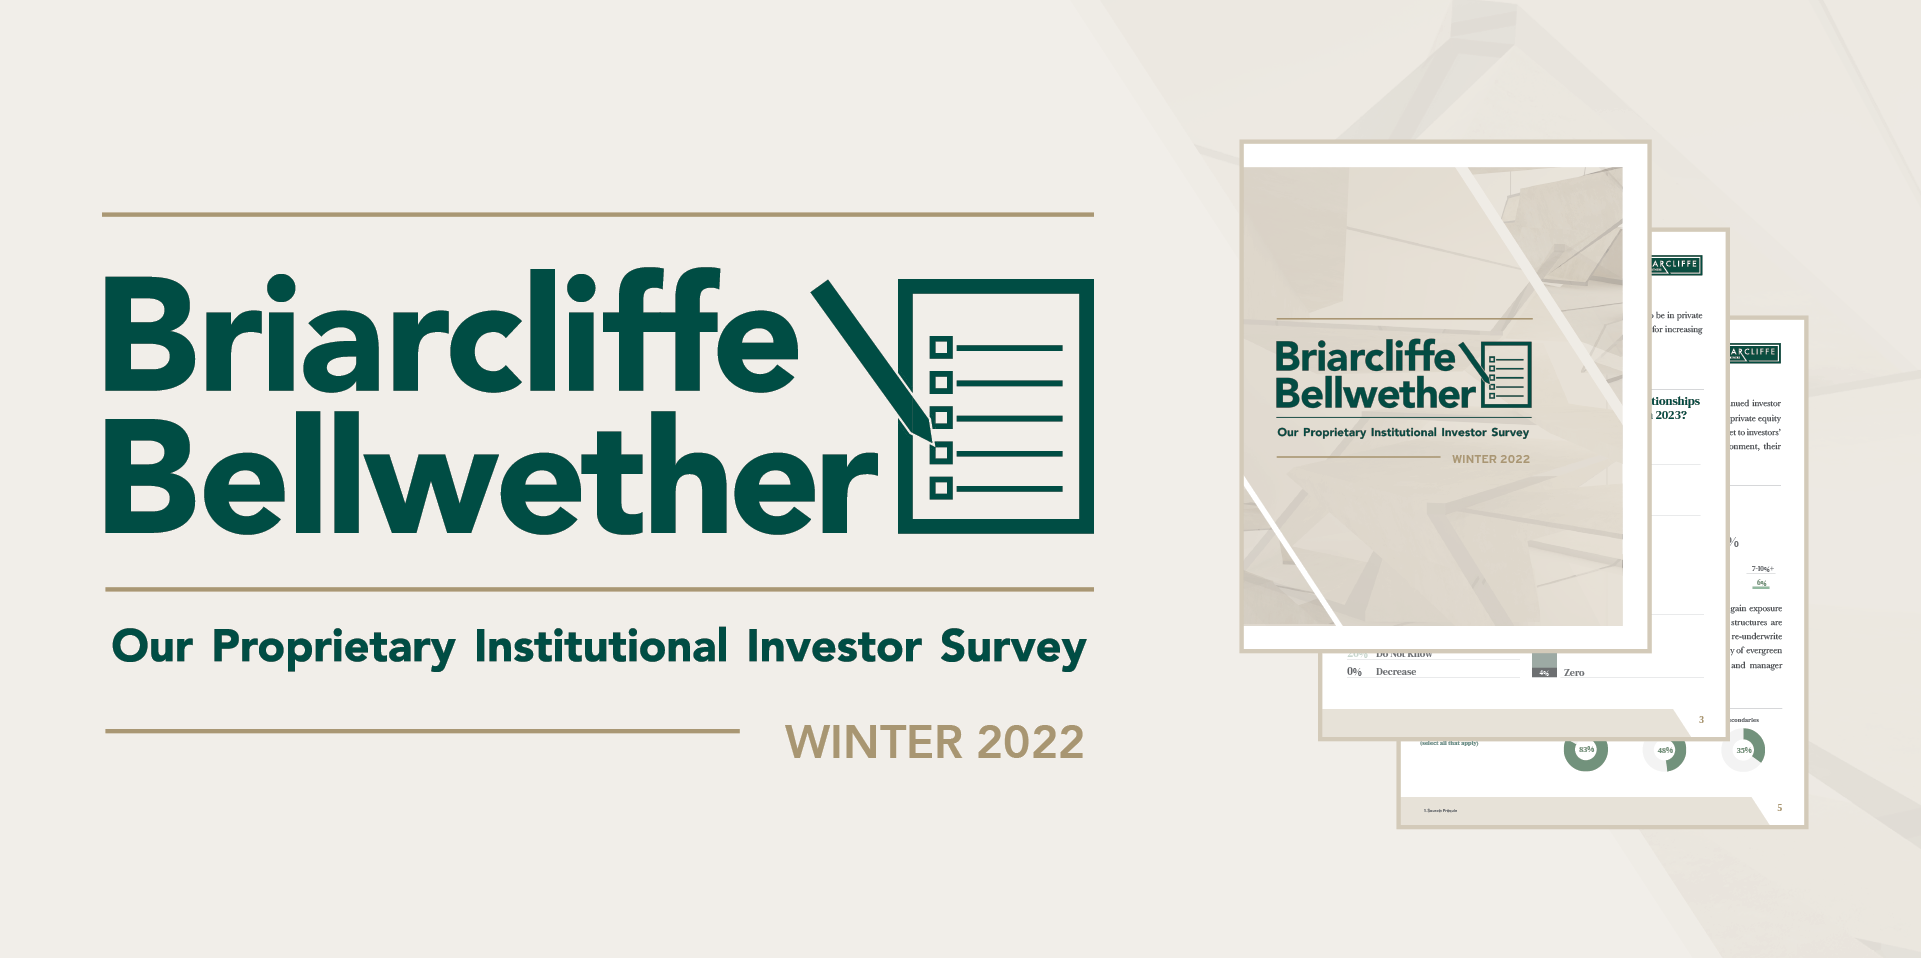 Briarcliffe Bellwether - December 2022